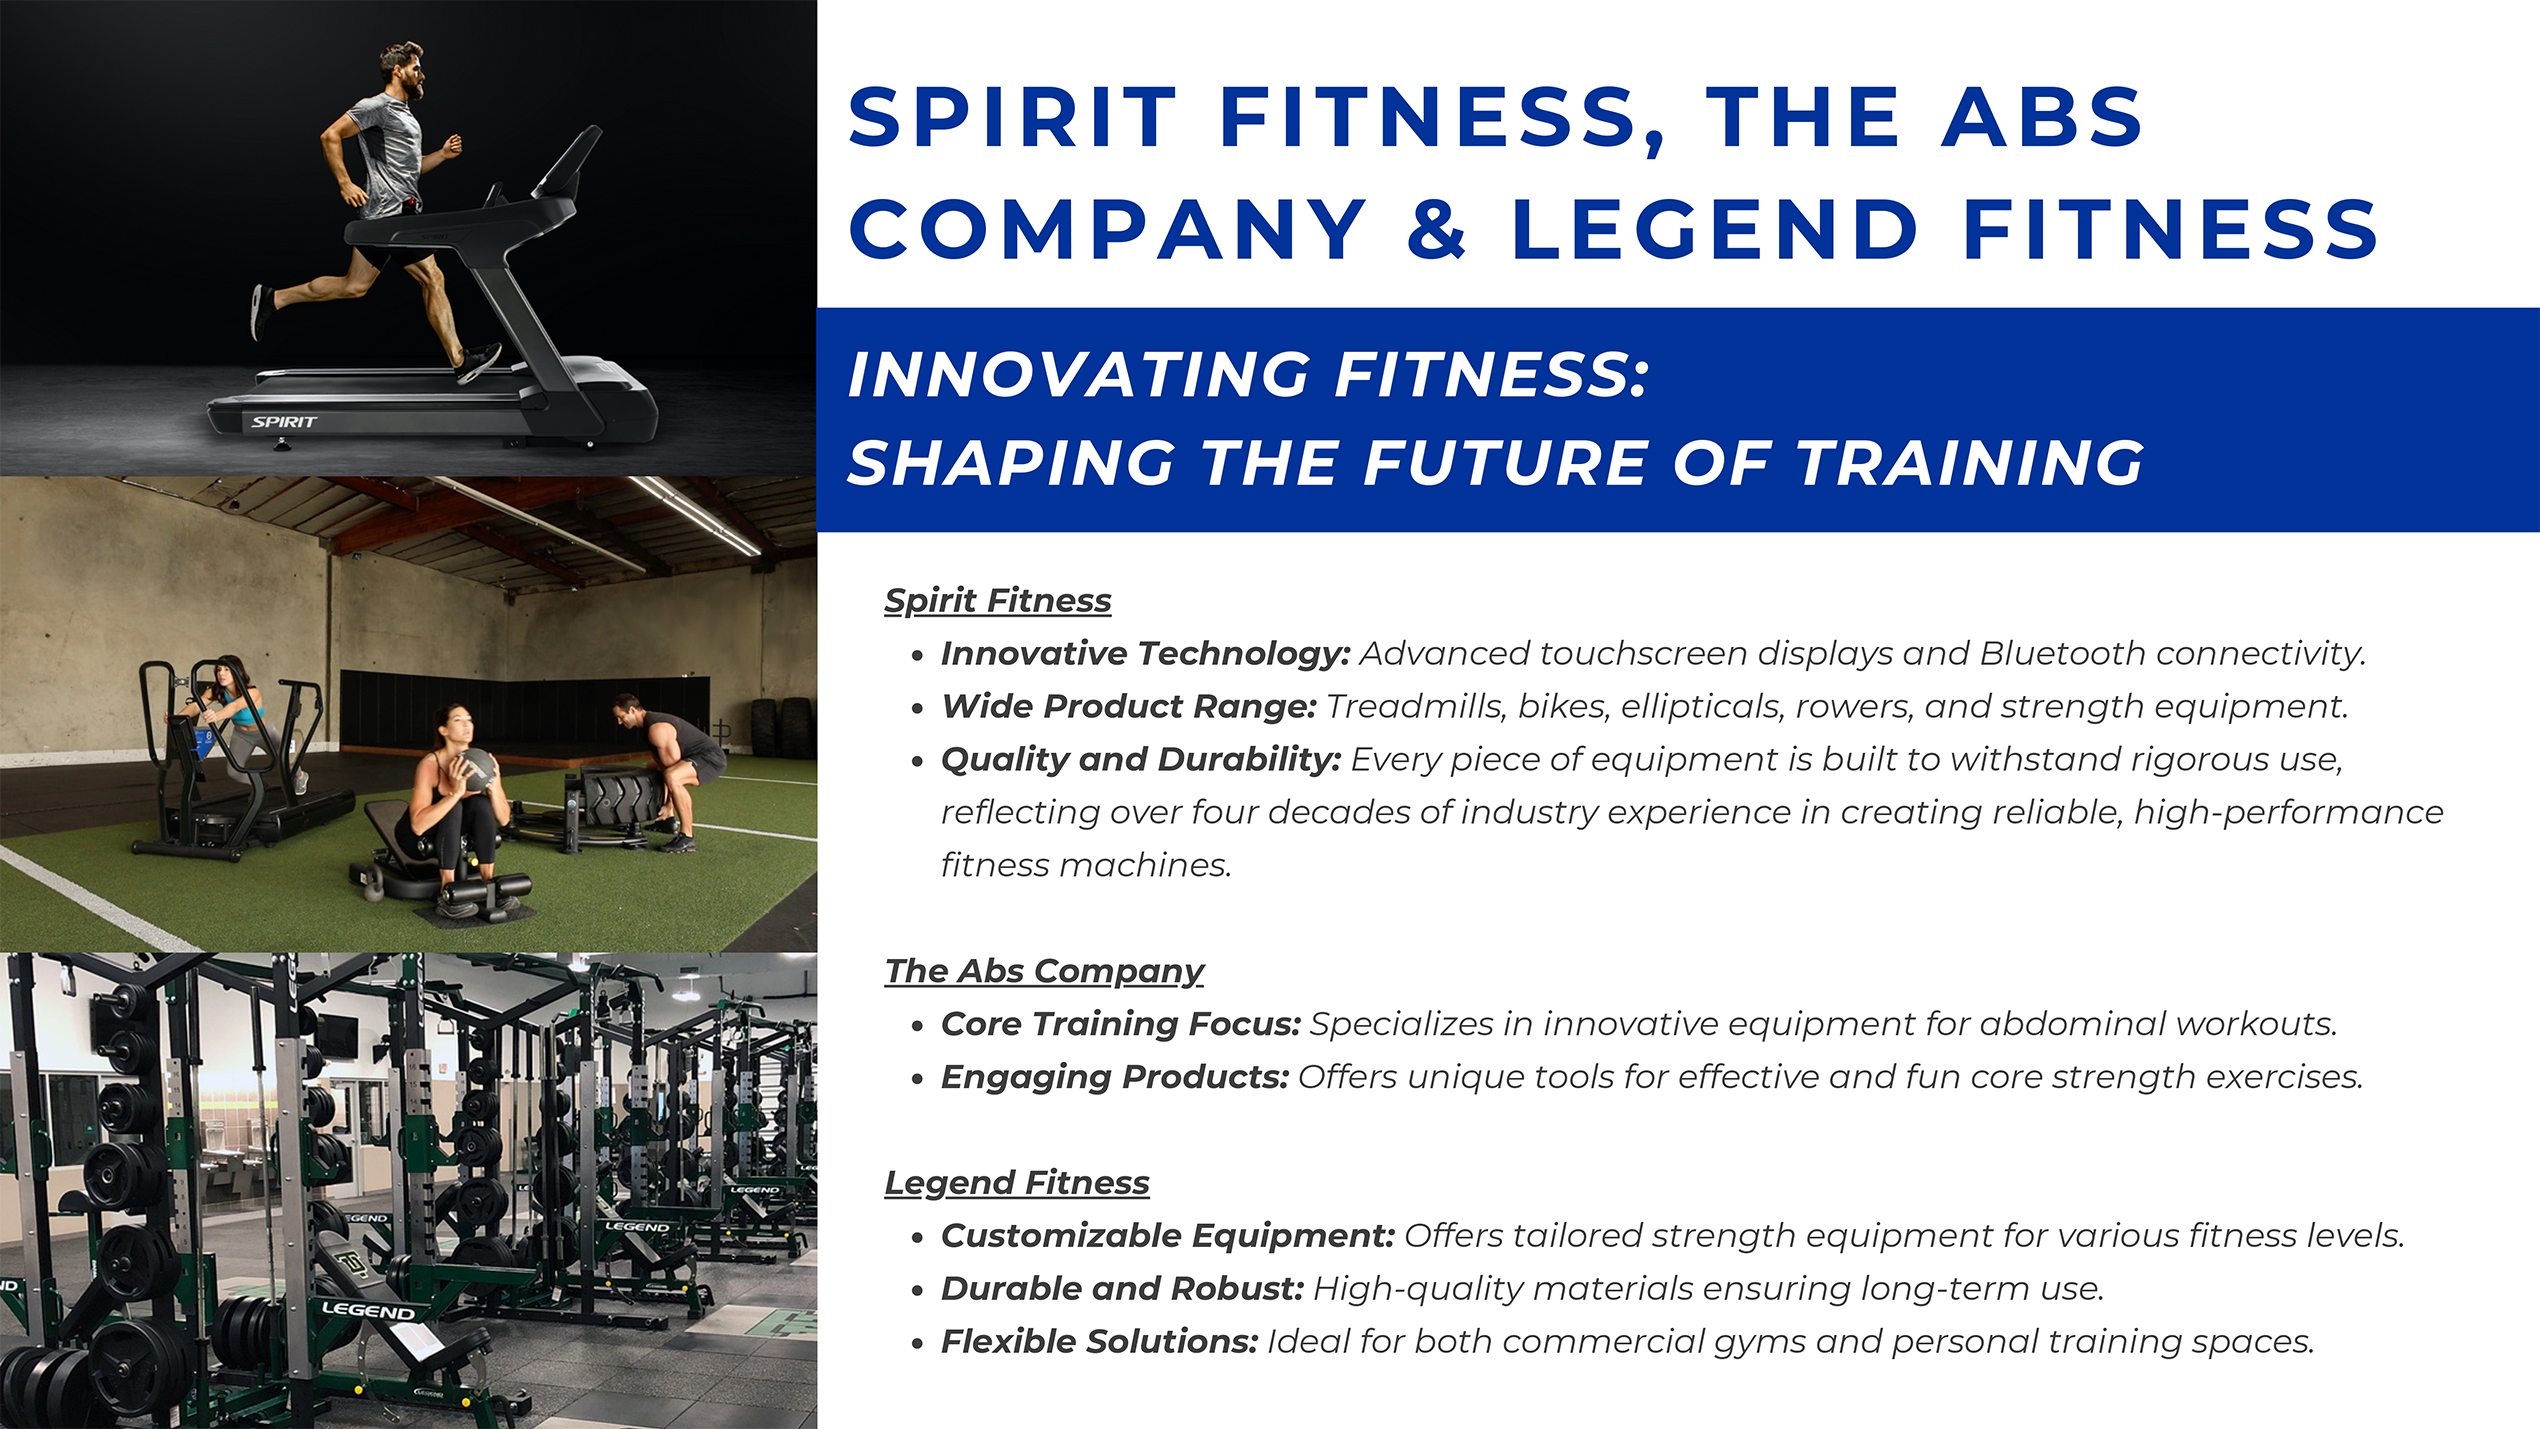 Sprint Fitness, The Abs Company & Legend Fitness - innovating fitness and shaping the future of training